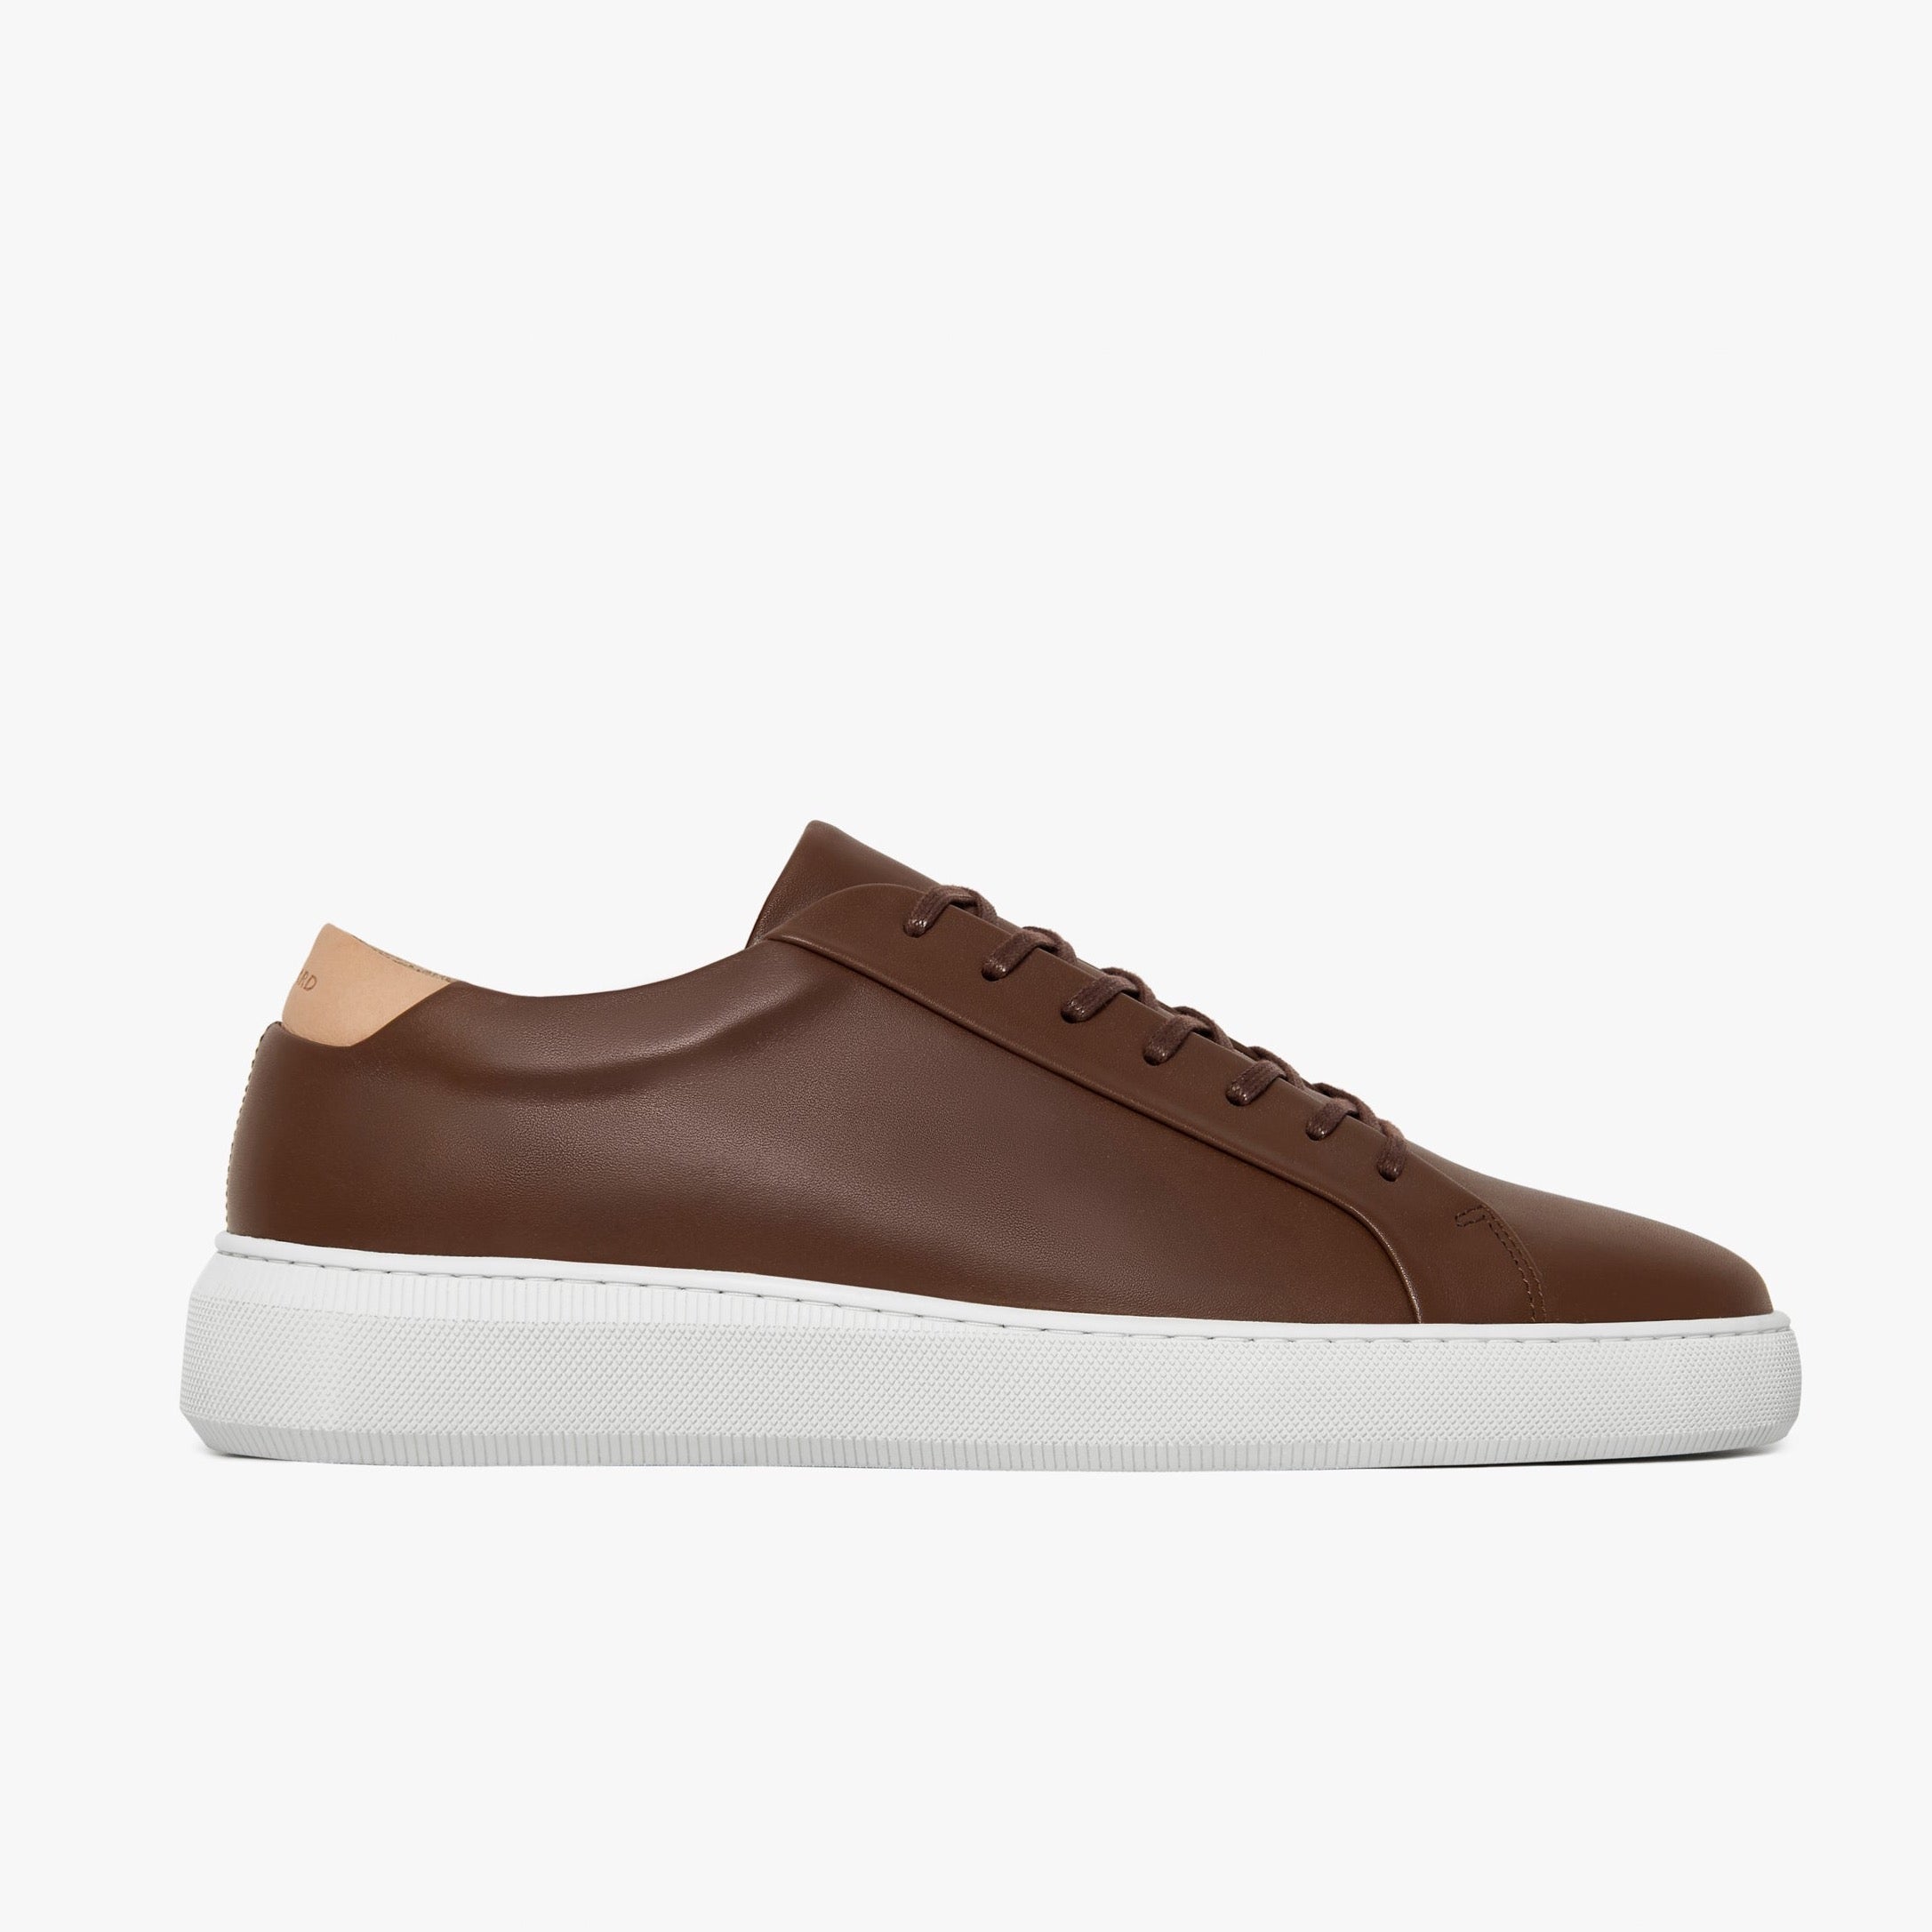 Series 8 Chestnut Leather Mens